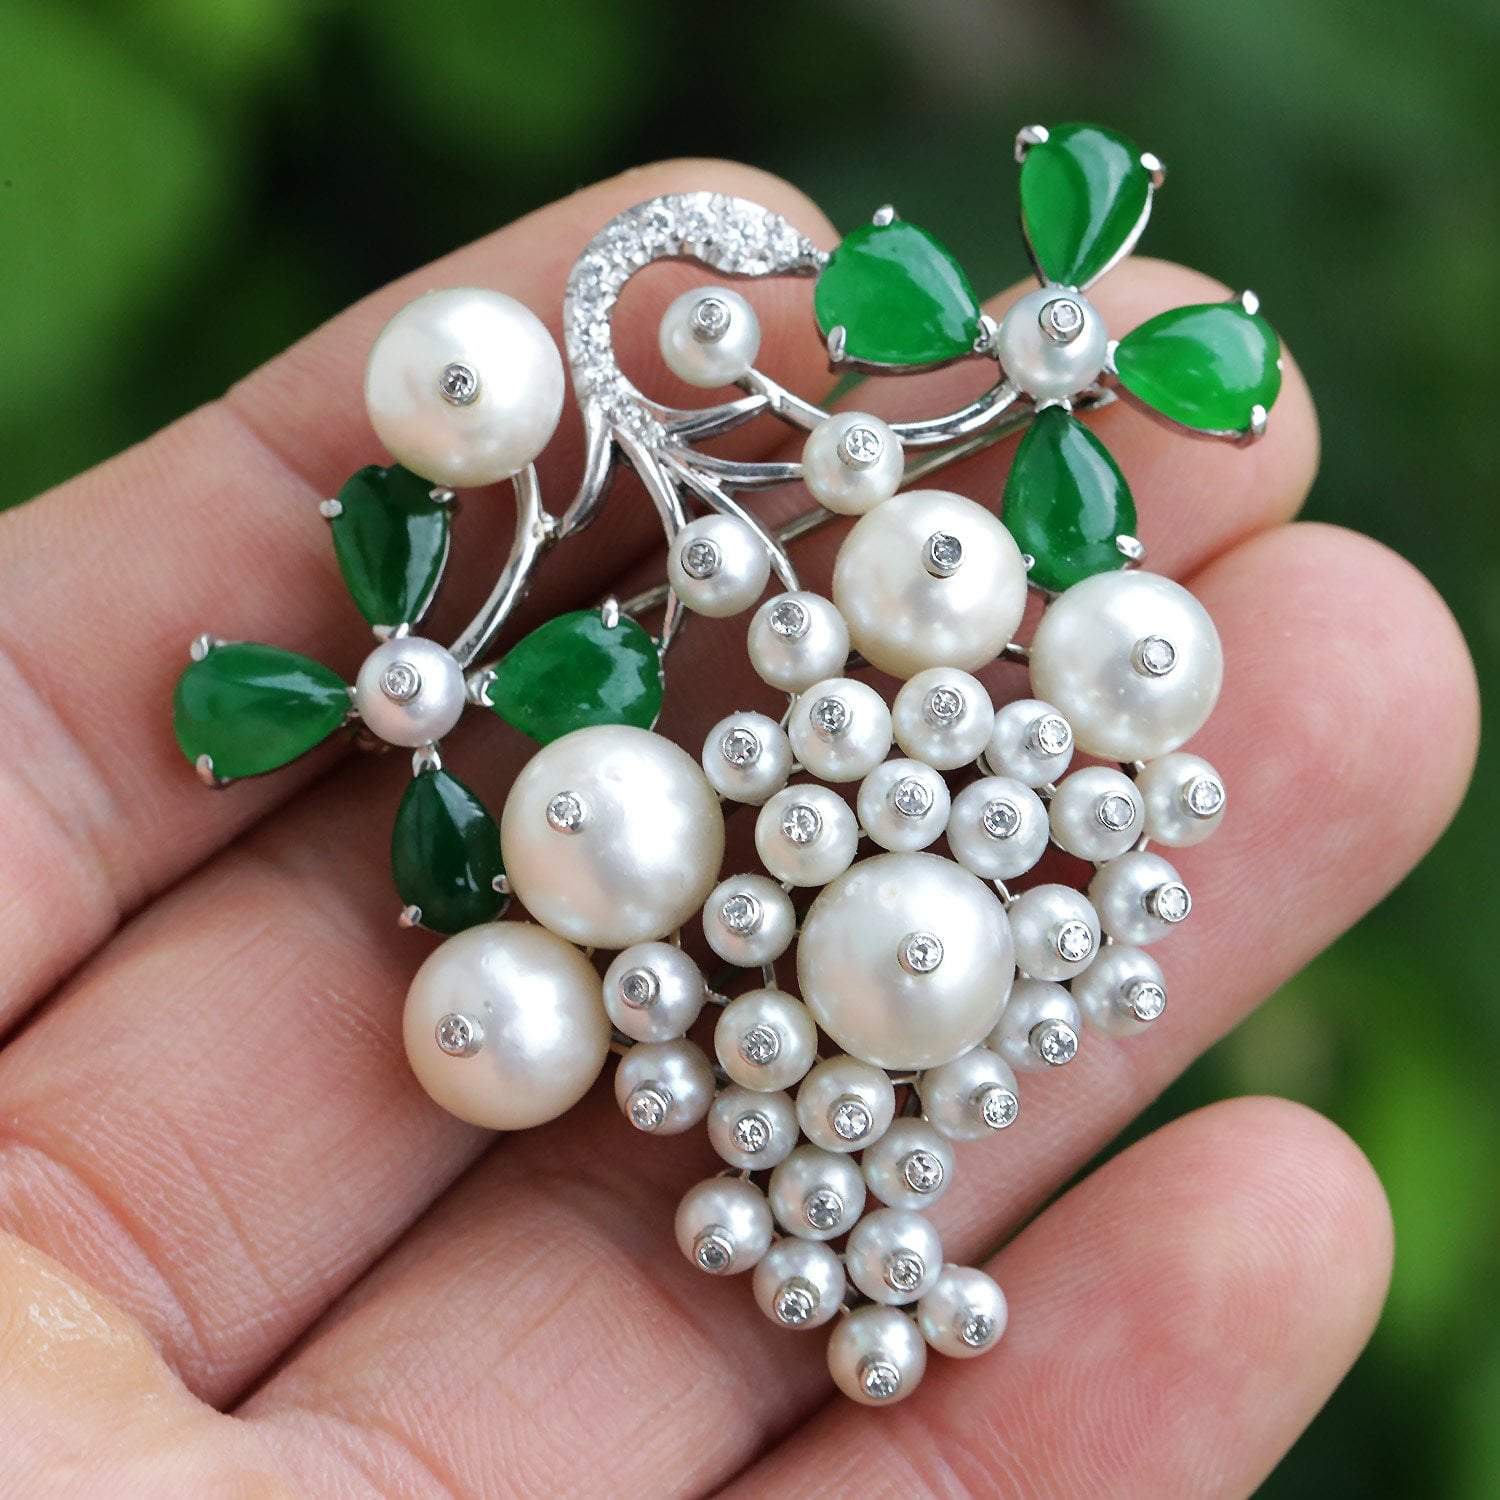 XaiYimee Vintage Imitating Pearl Brooch Number 5 Brooches Pins for Women Fashion Banquet Jewelry